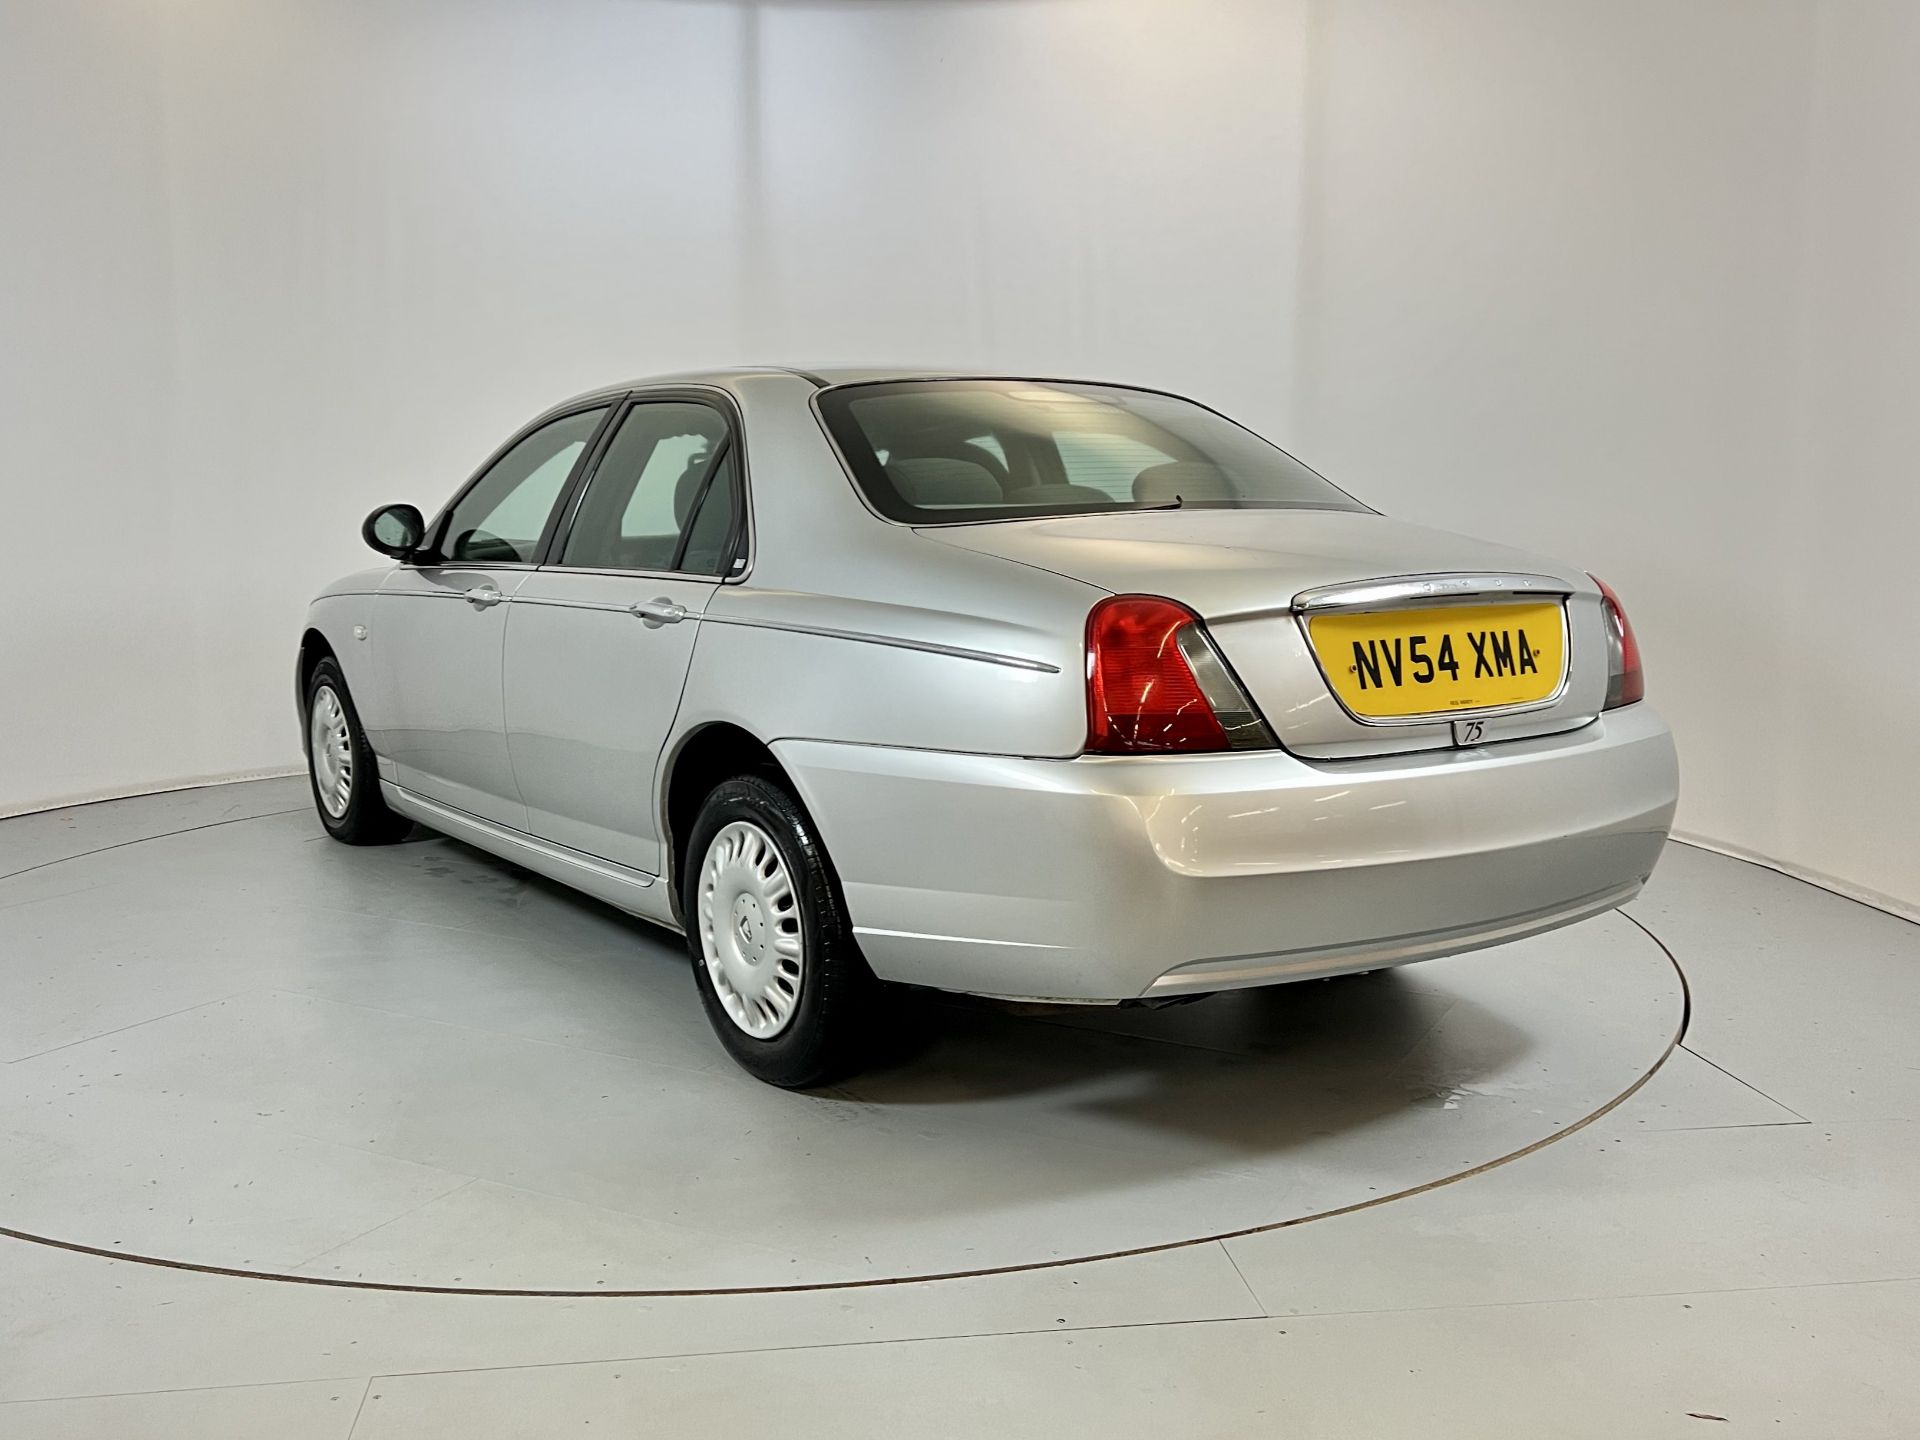 Rover 75 - Image 7 of 33